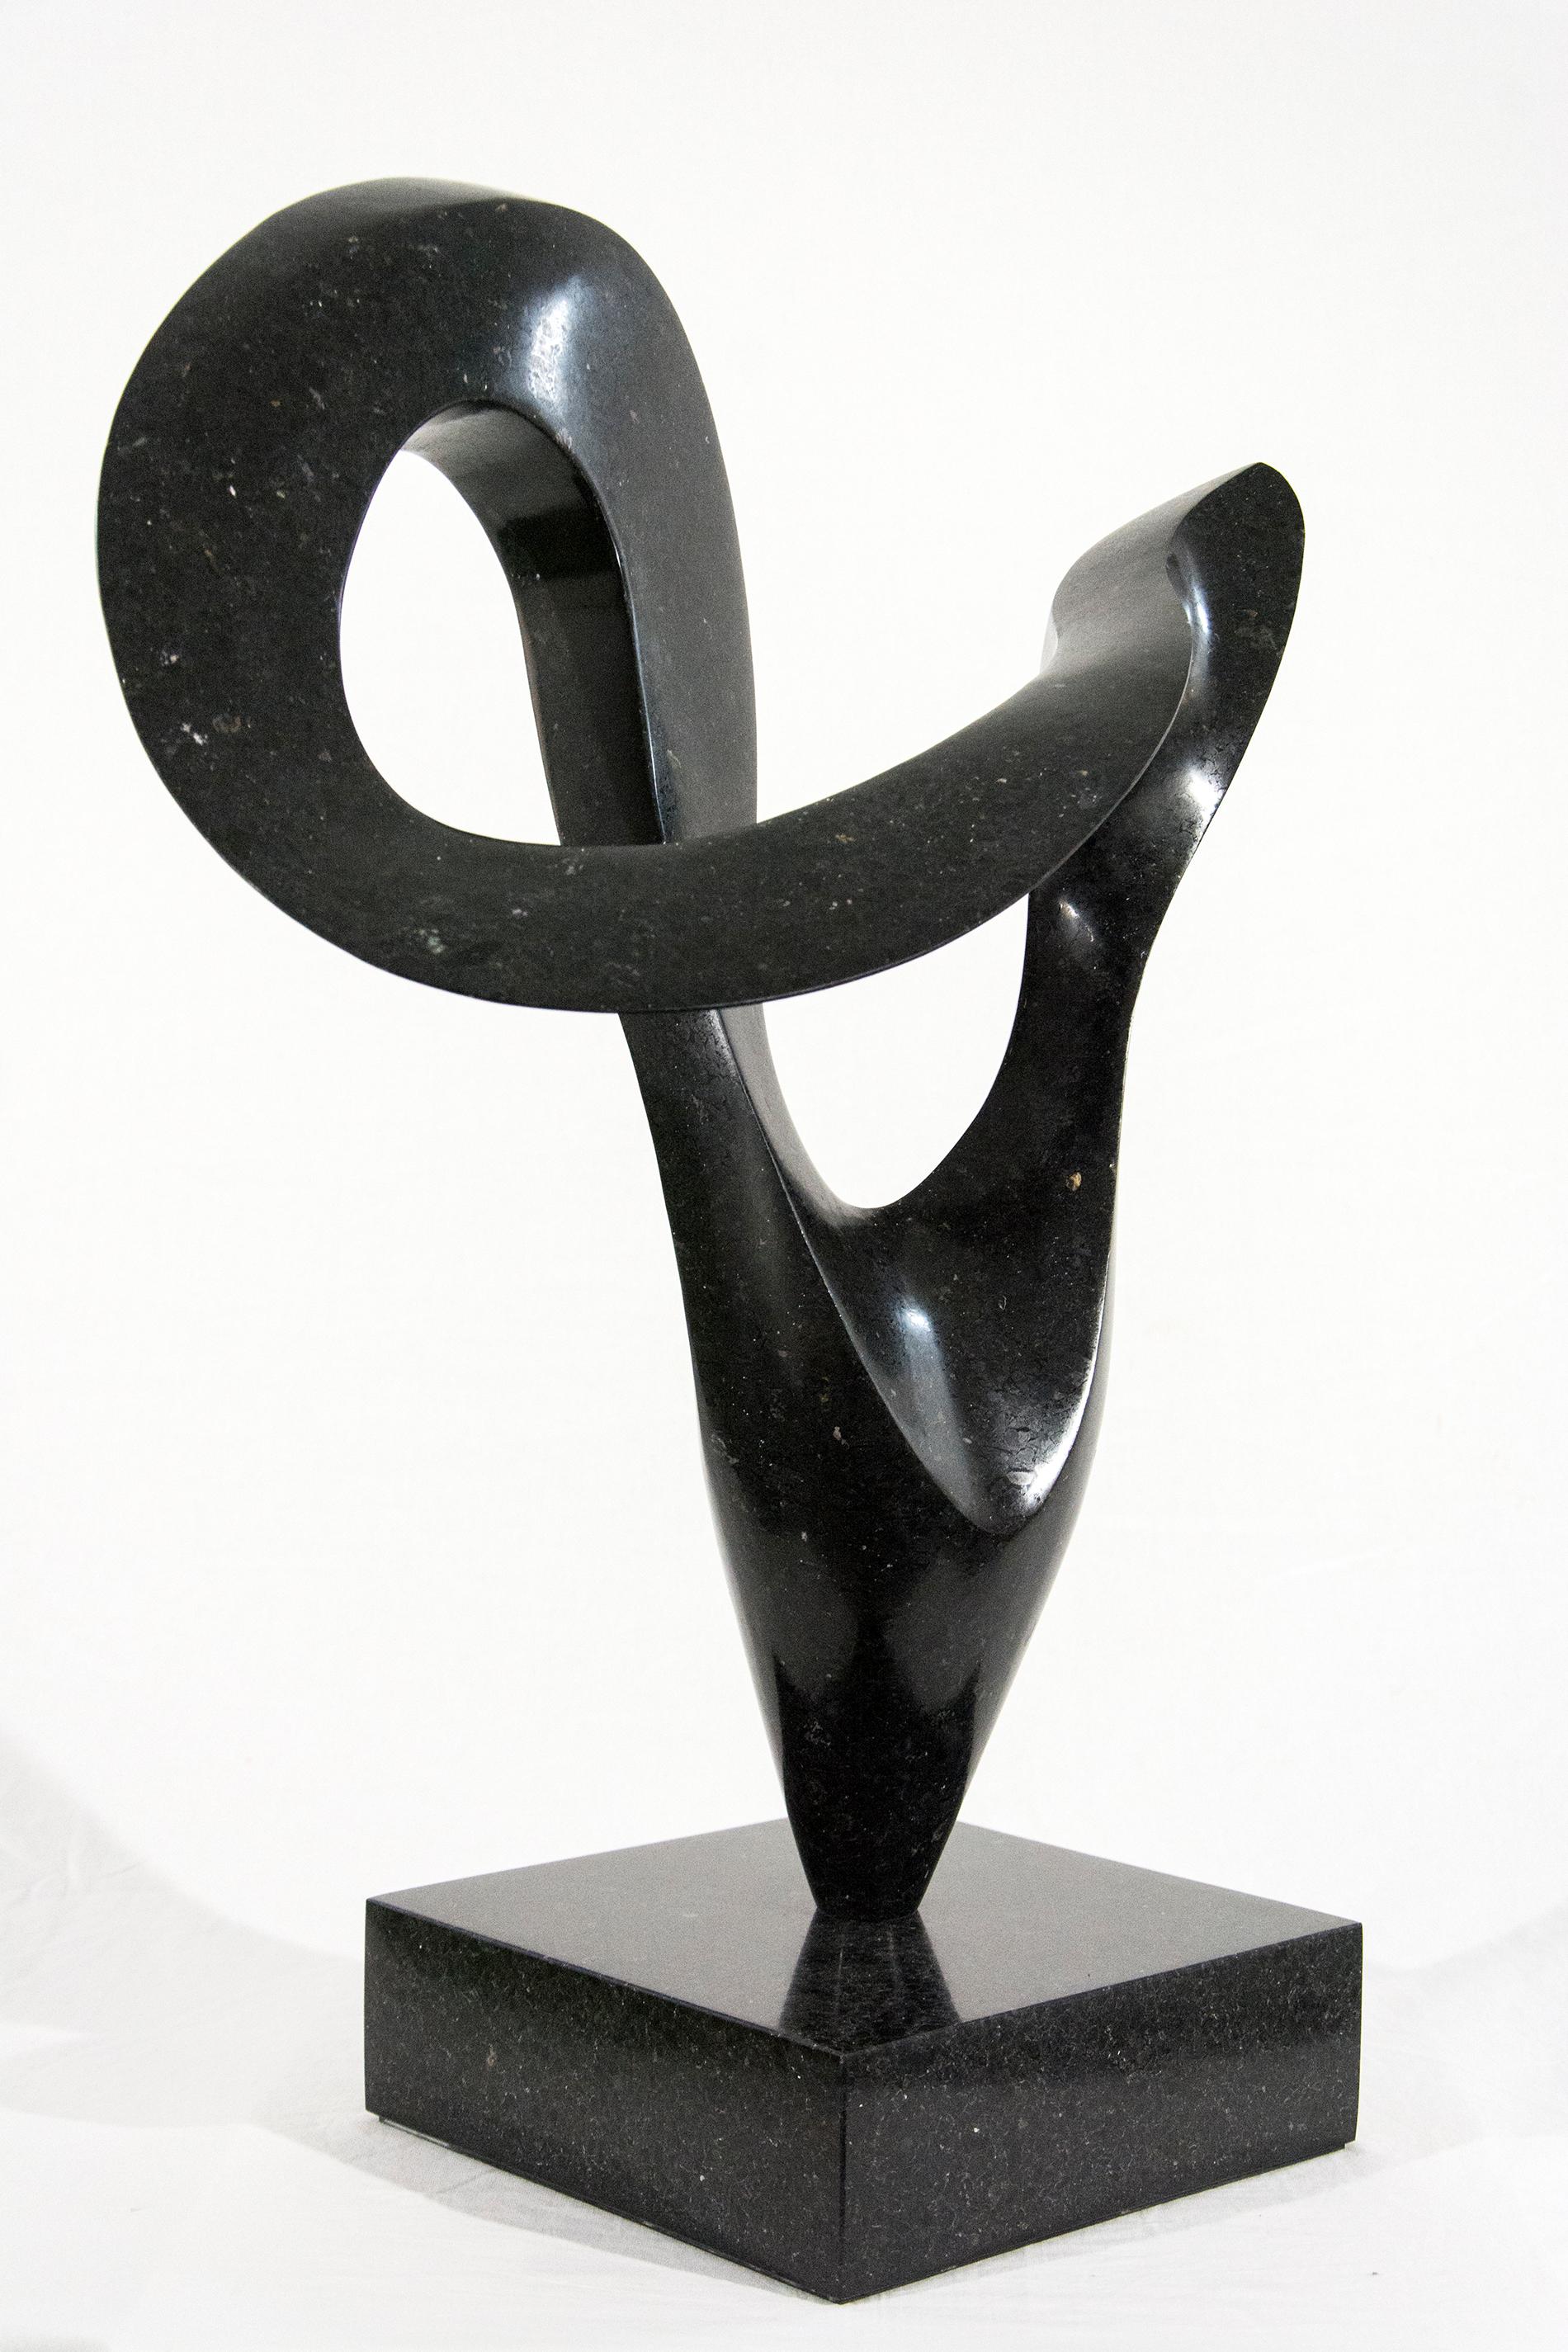 Pirouette 7/20 - Sculpture by Jeremy Guy